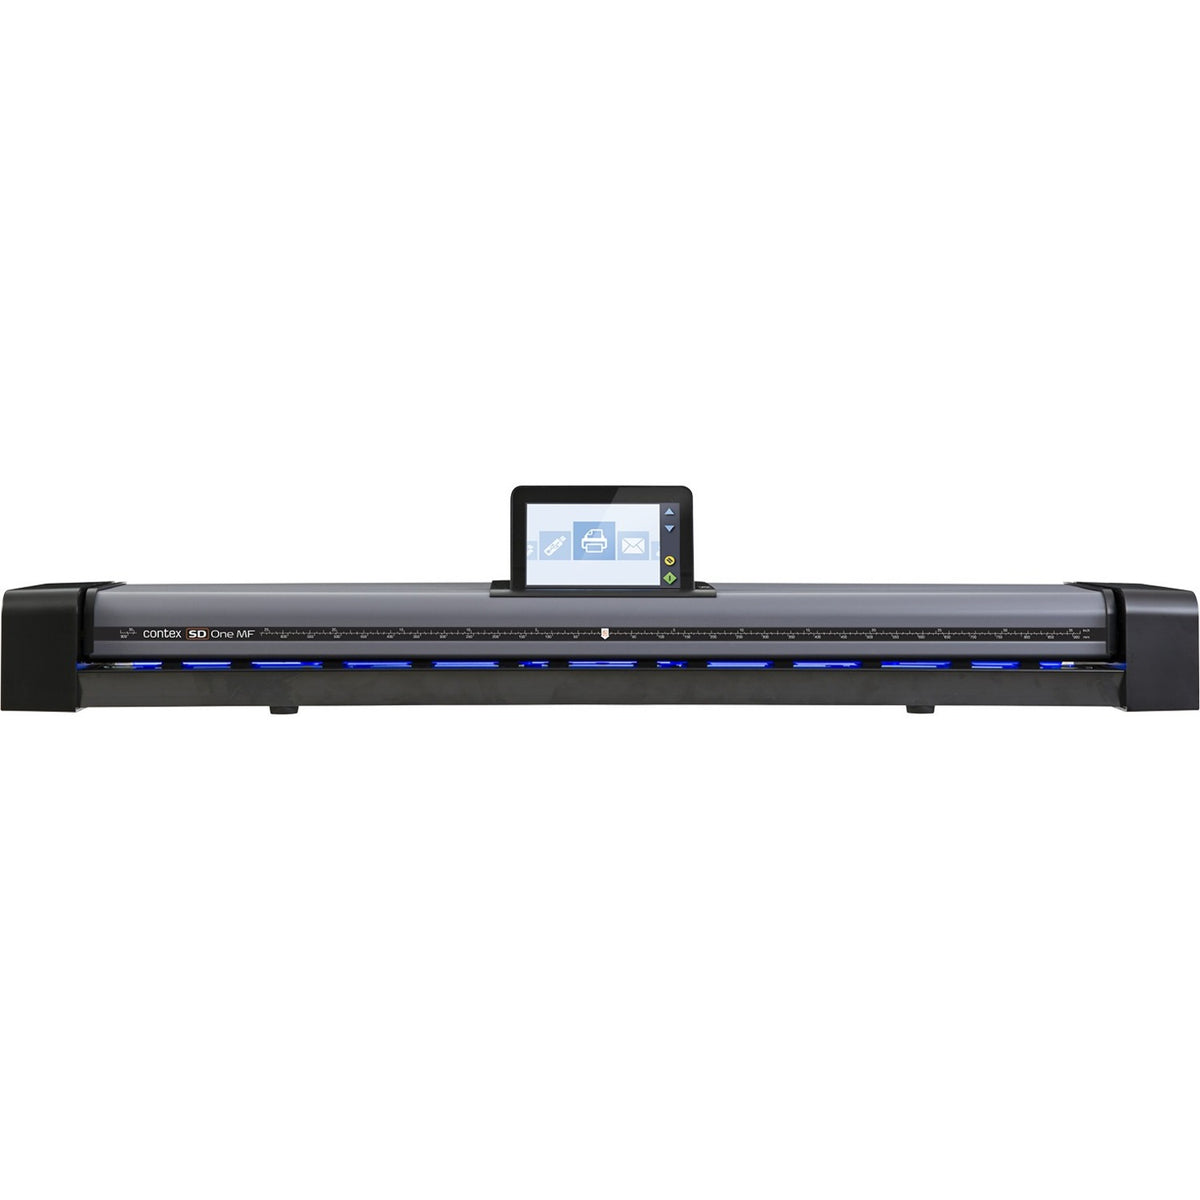 Contex SD One SD One MF 36 Large Format Sheetfed Scanner - 600 dpi Optical - 5300D005003A